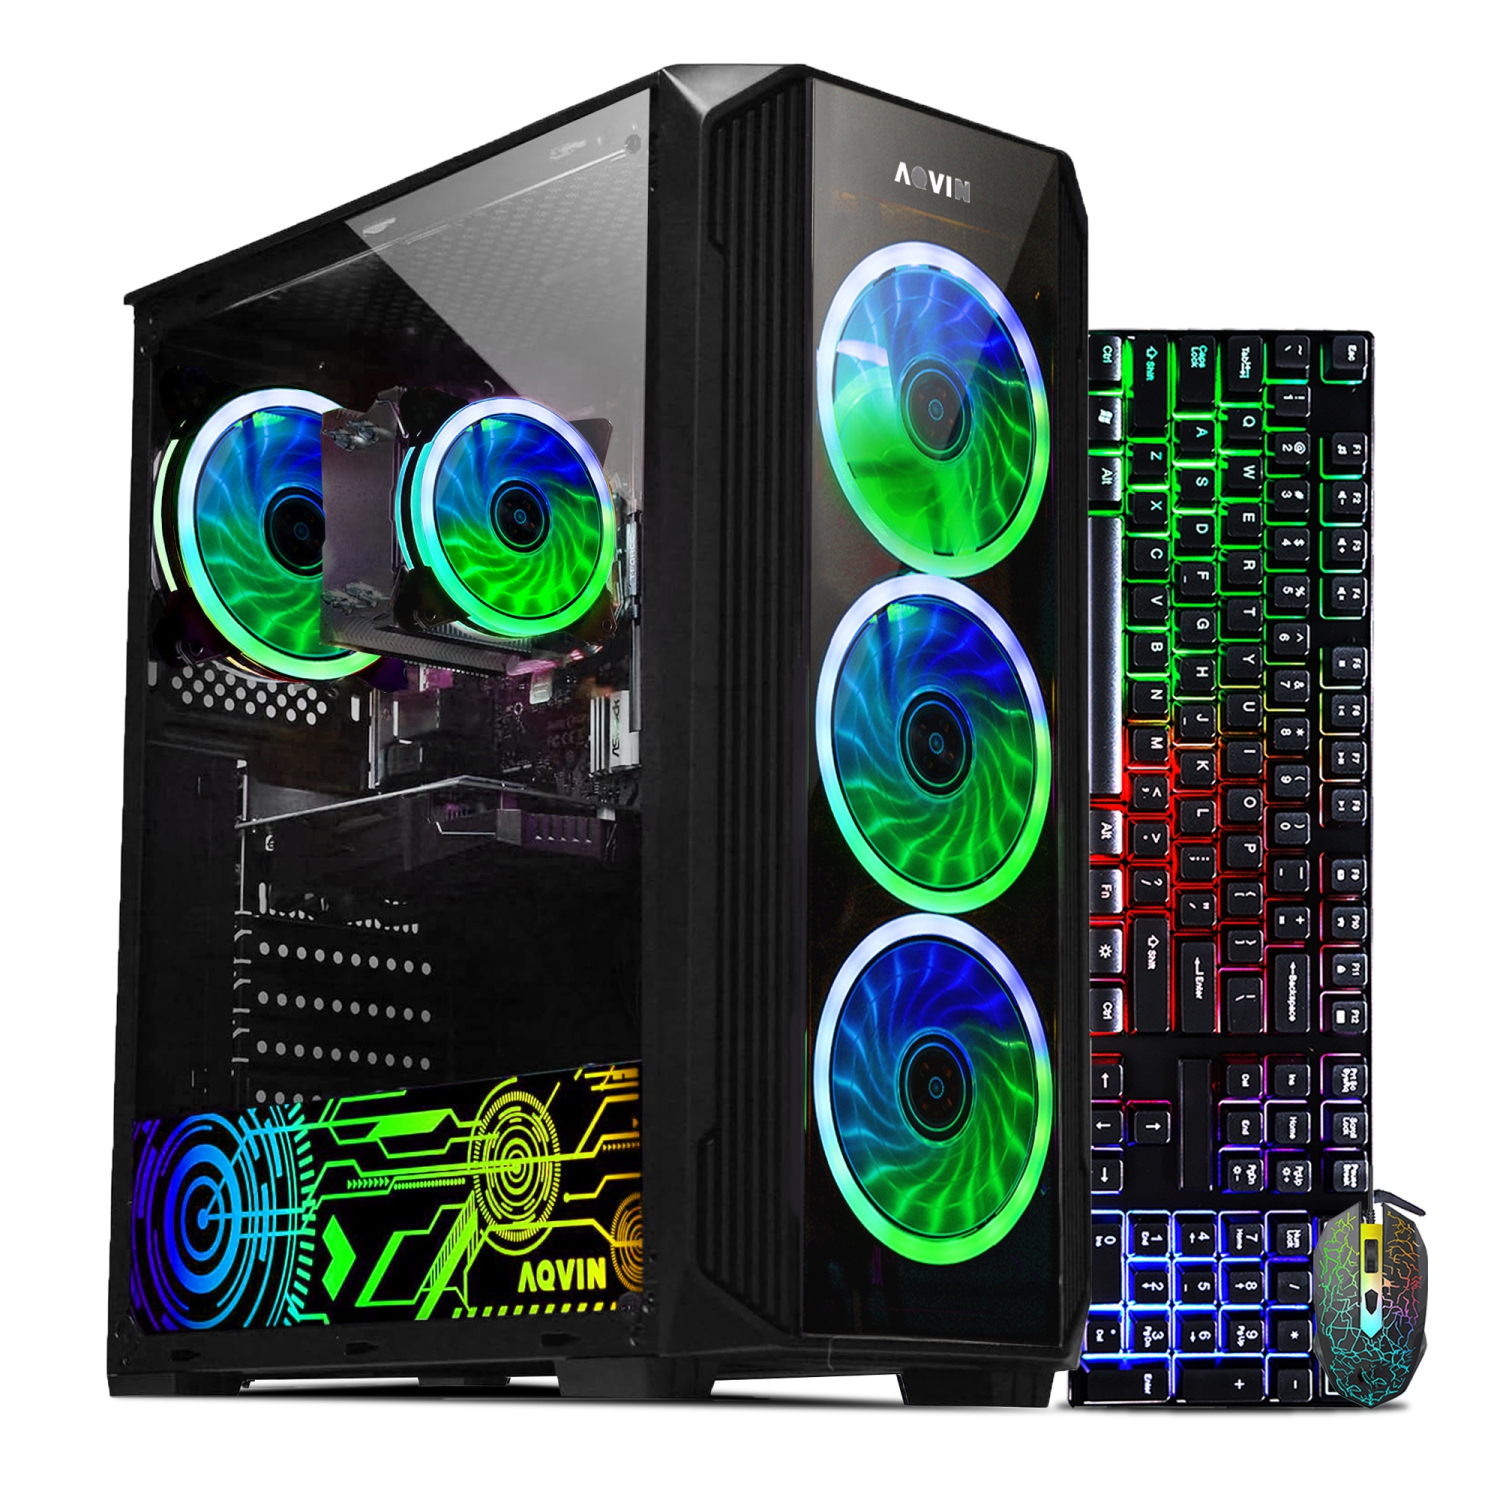 Gaming PC AQVIN ZForce Tower Desktop - GeForce RTX 3050 8GB GDDR6 - Intel Core i7 up to 4.0Ghz 32GB DDR4 RAM 1TB SSD(fast boot) + 2TB HDD RGB Gaming Keyboard Mouse Windows 10 Wifi